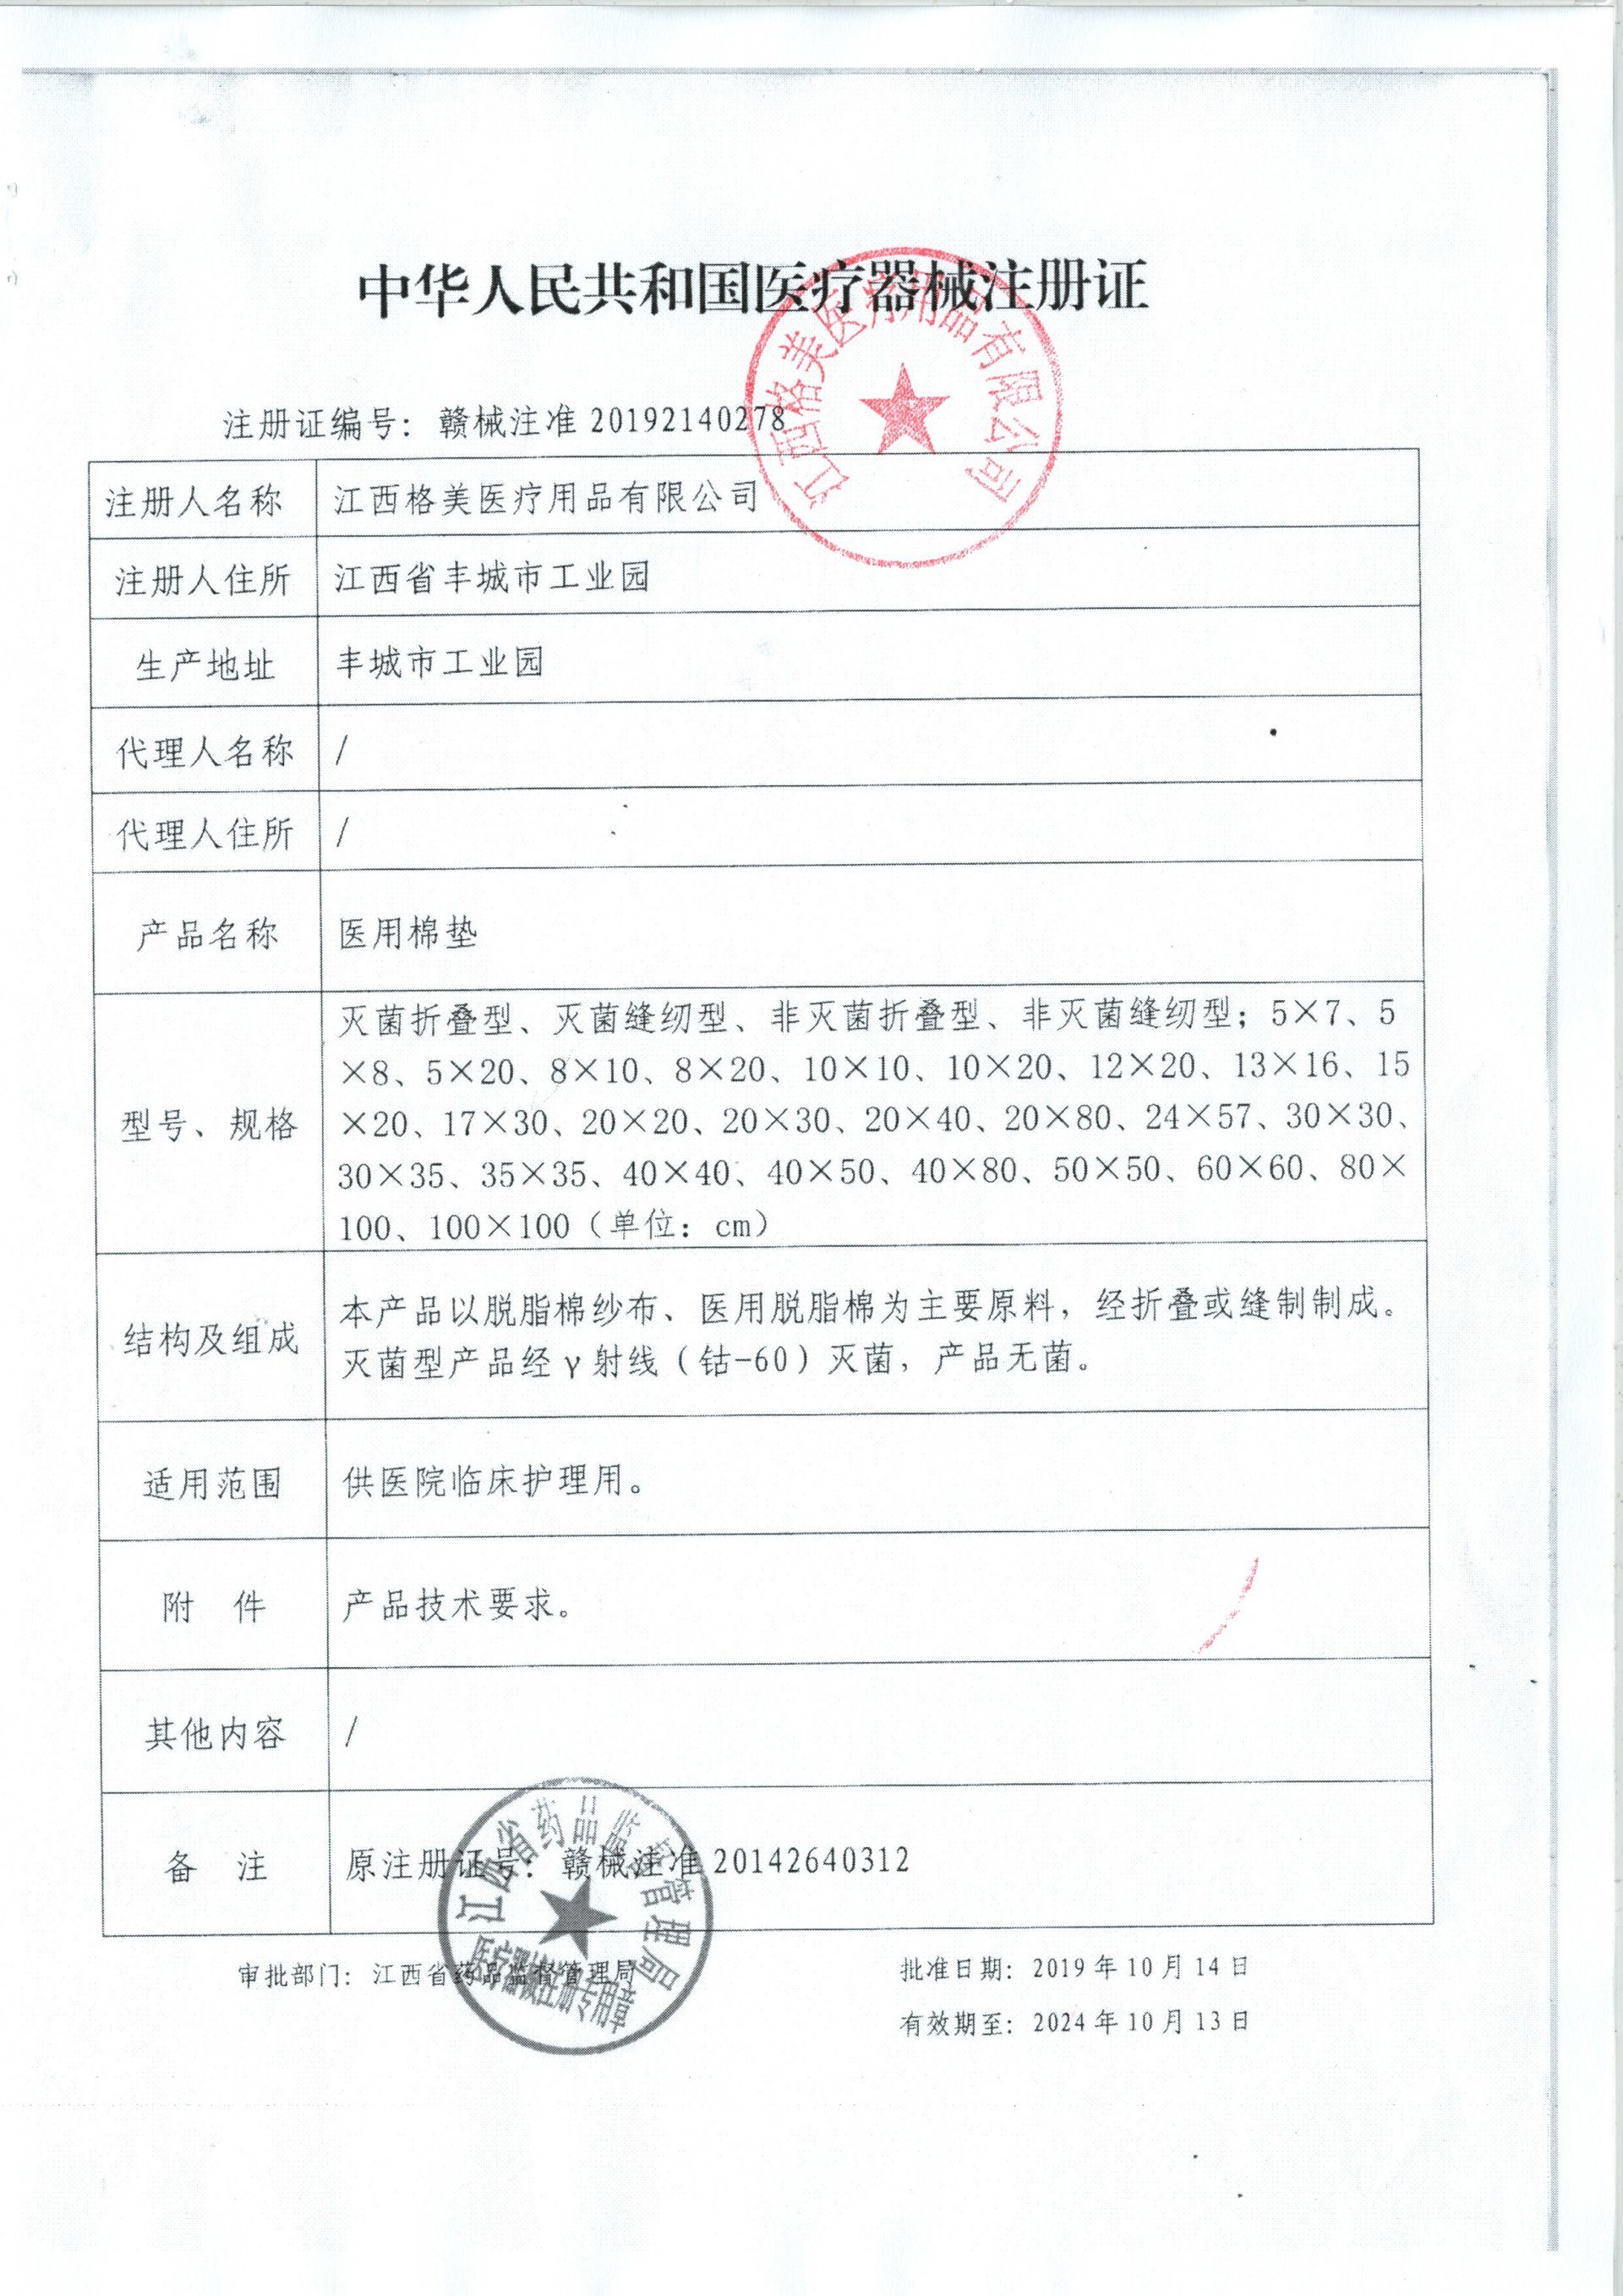 Medical cotton pad registration certificate (new certificate)